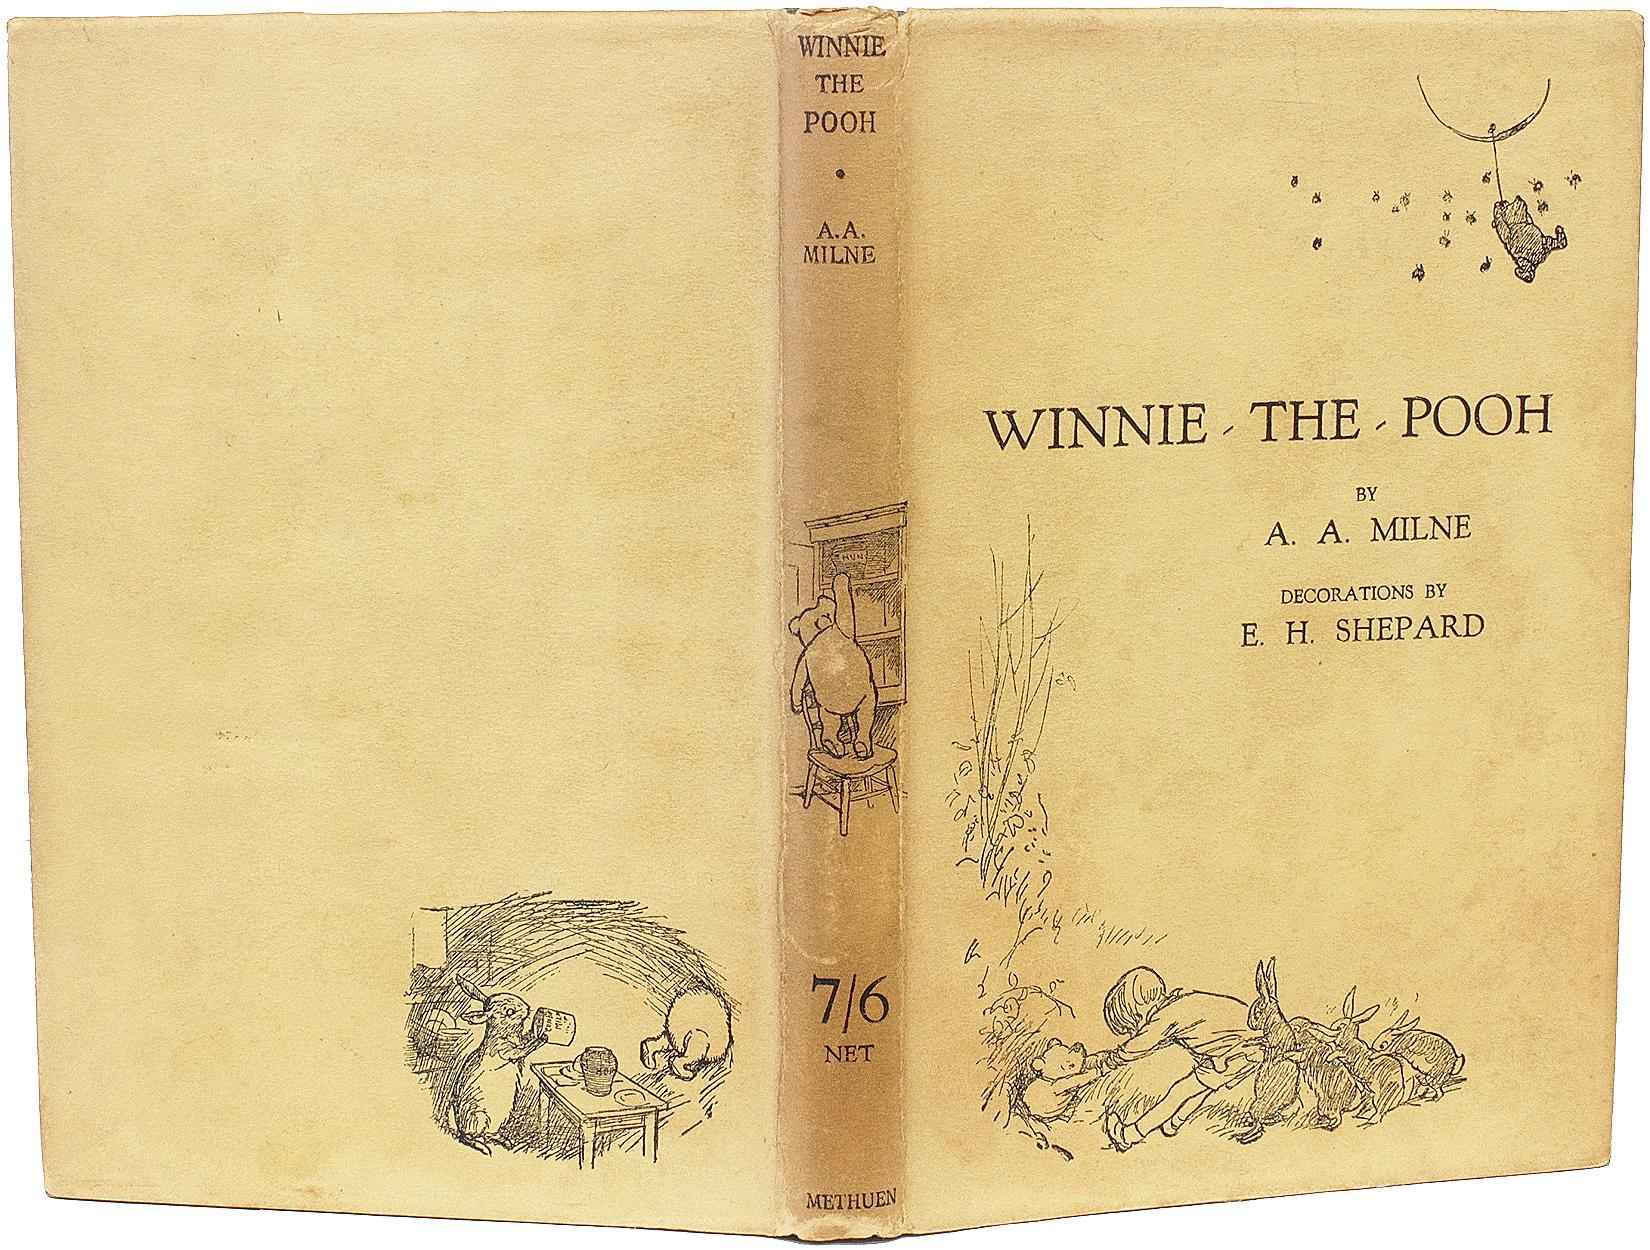 AUTHOR: MILNE. A. A.. 

TITLE: Winnie The Pooh.

PUBLISHER: London: Methuen & Co. Ltd., 1926.

DESCRIPTION: FIRST EDITION FIRST PRINTING WITH THE DJ. 1 volume, illustrated by E. H. Shephard. Bound in the publisher's original gilt stamped green